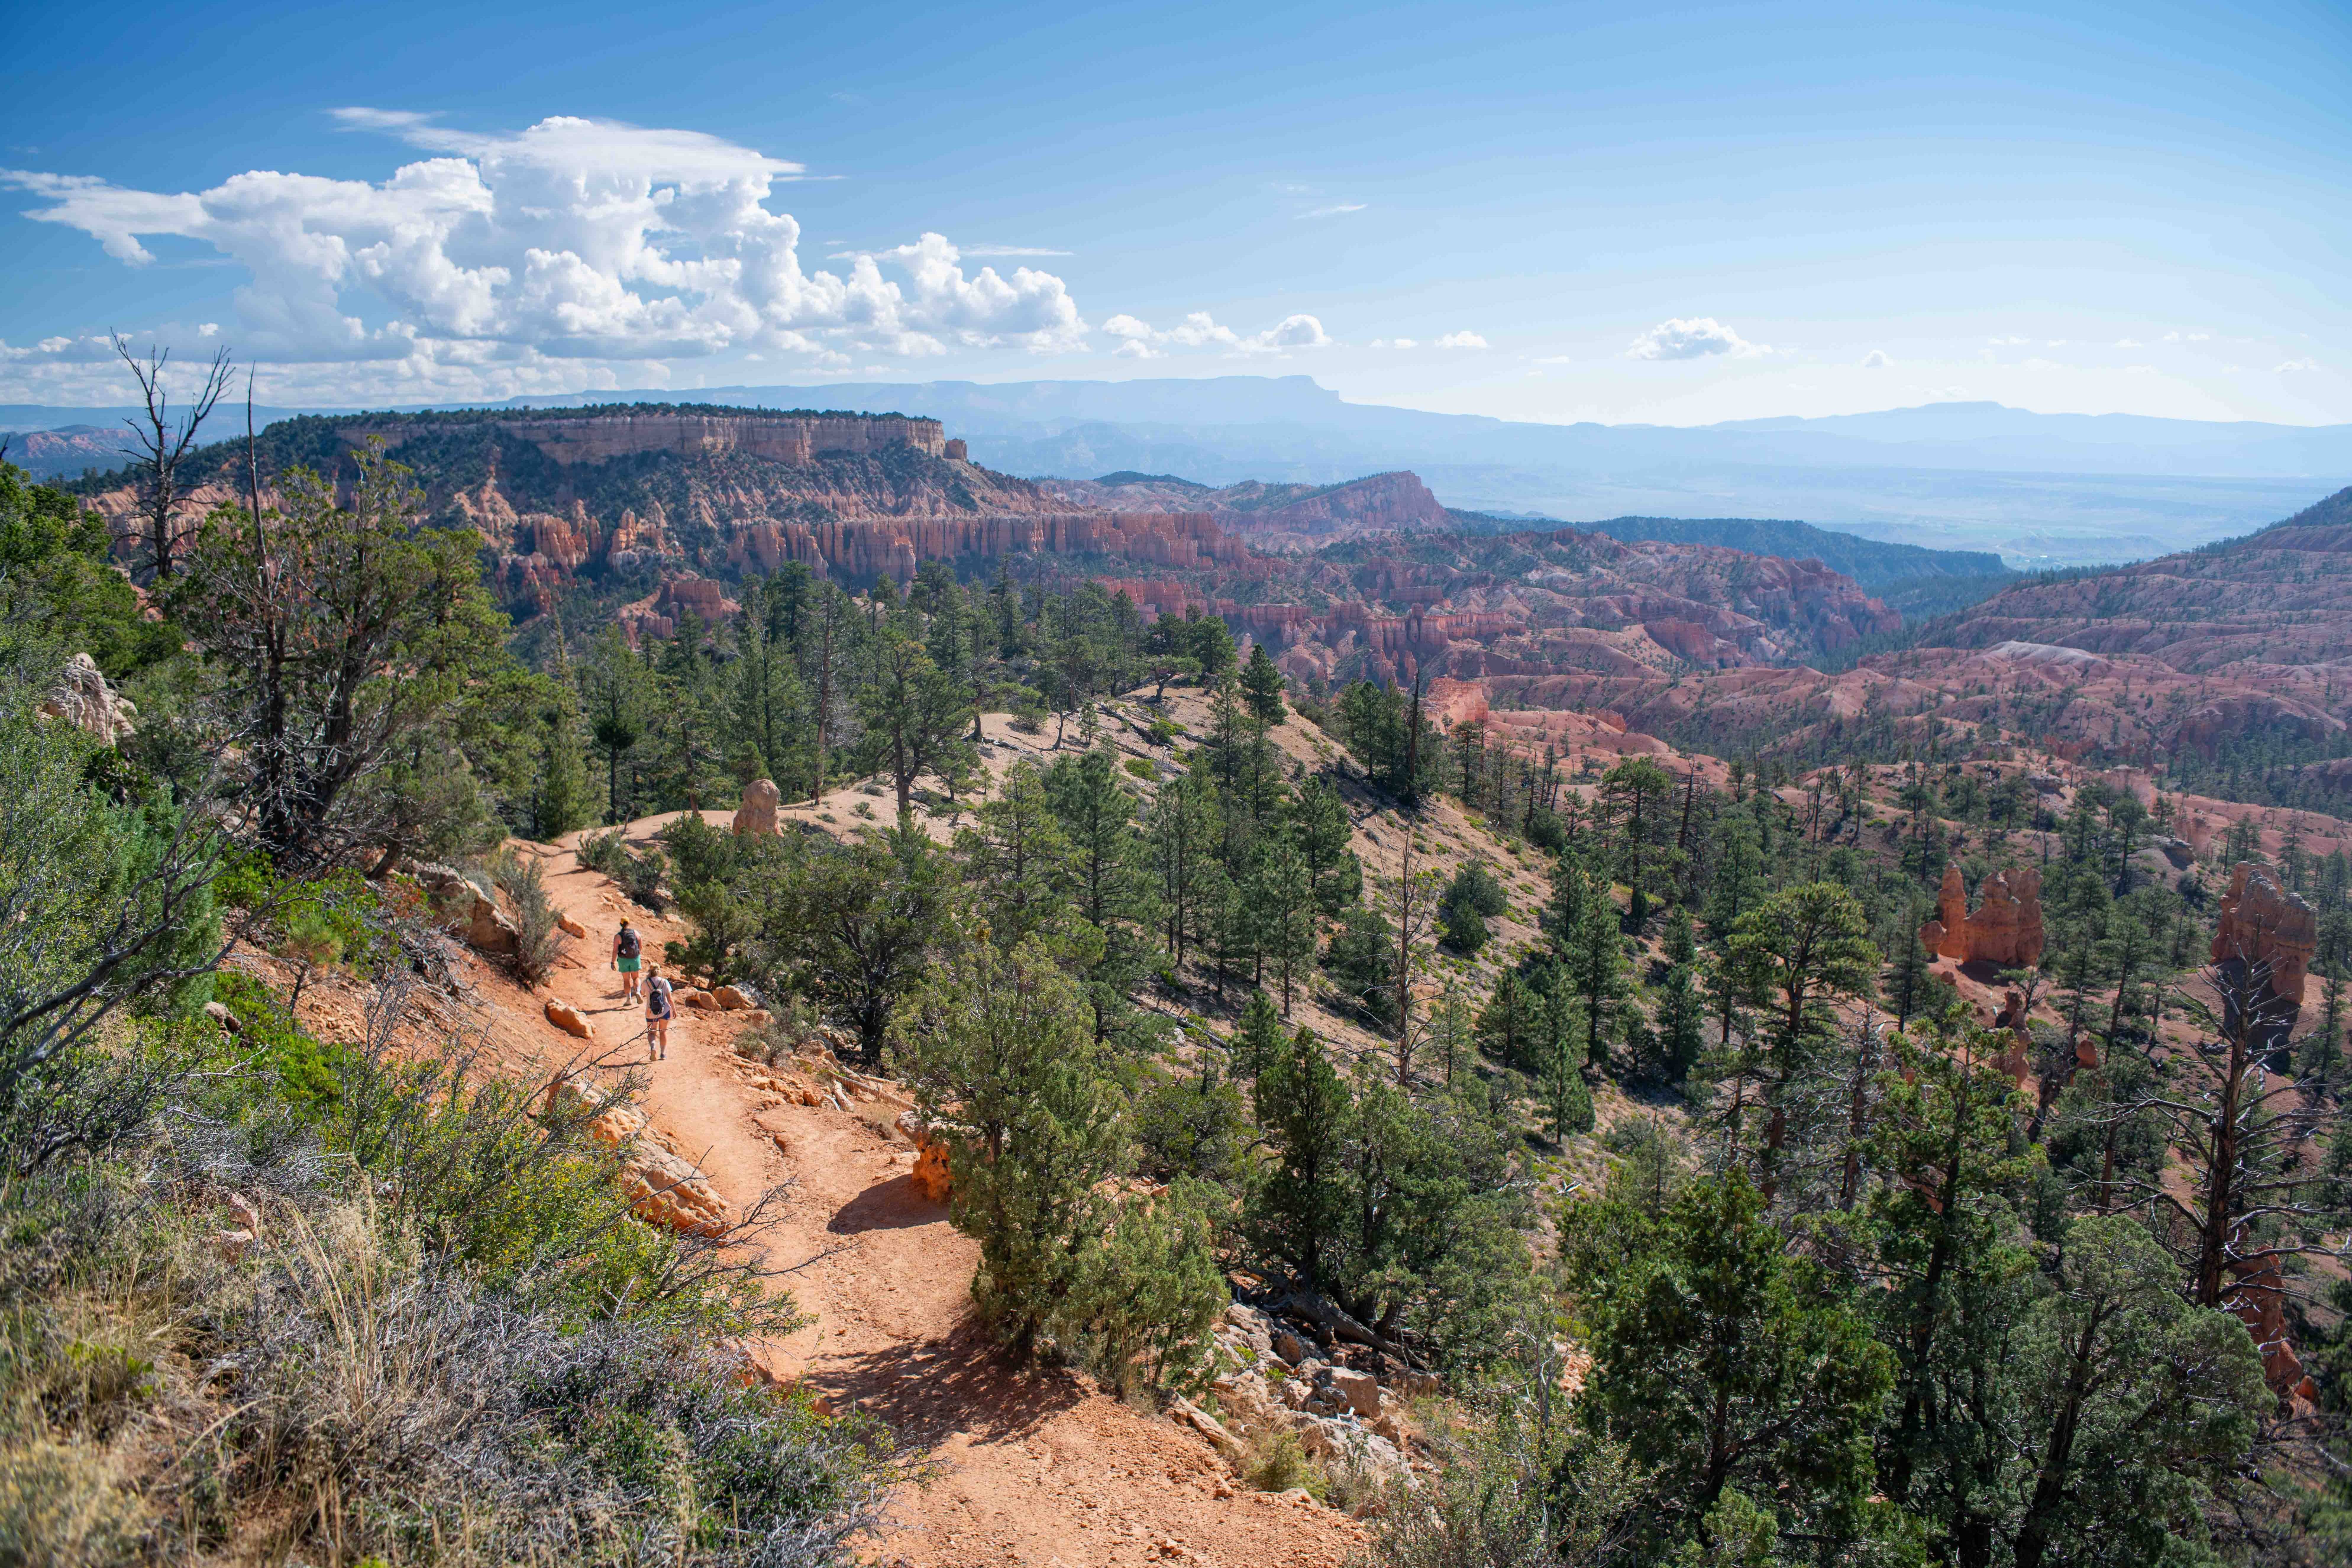 <p>An Arizona hiker was found dead on a trail in Utah’s Bryce Canyon National Park after a thunderstorm caused flash flooding</p>